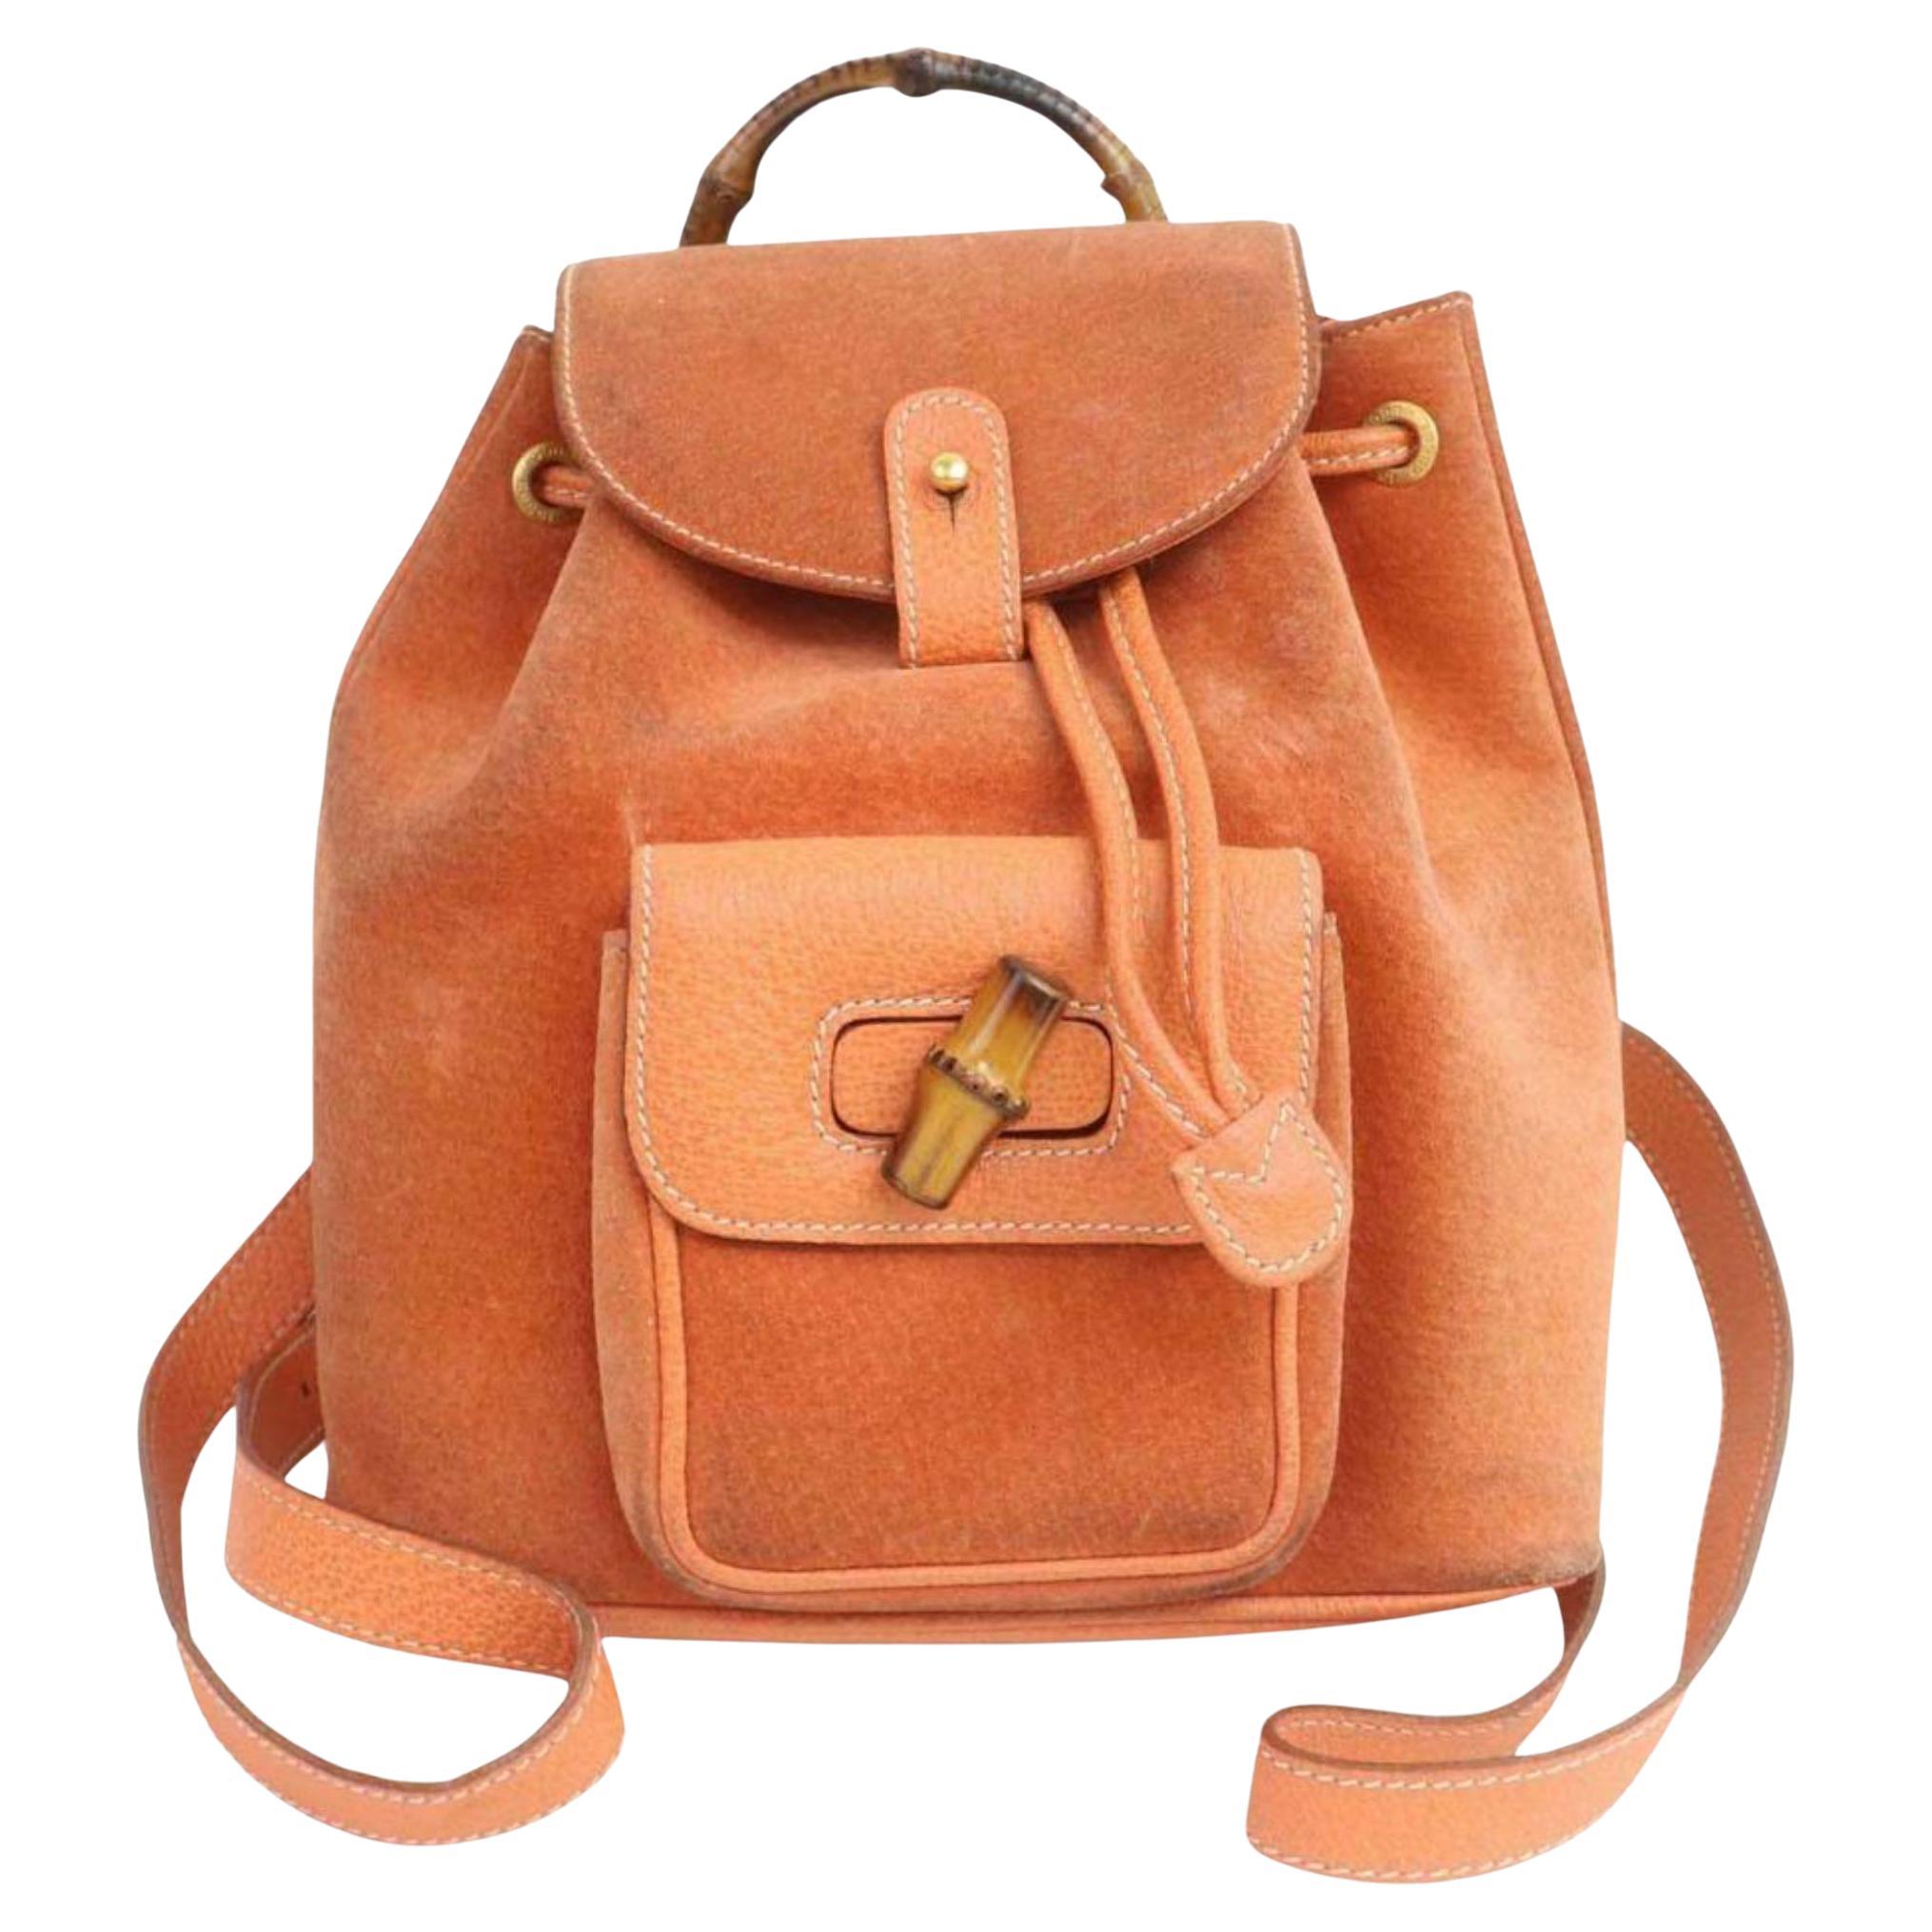 Gucci Orange Suede Bamboo Mini Backpack 855719 For Sale